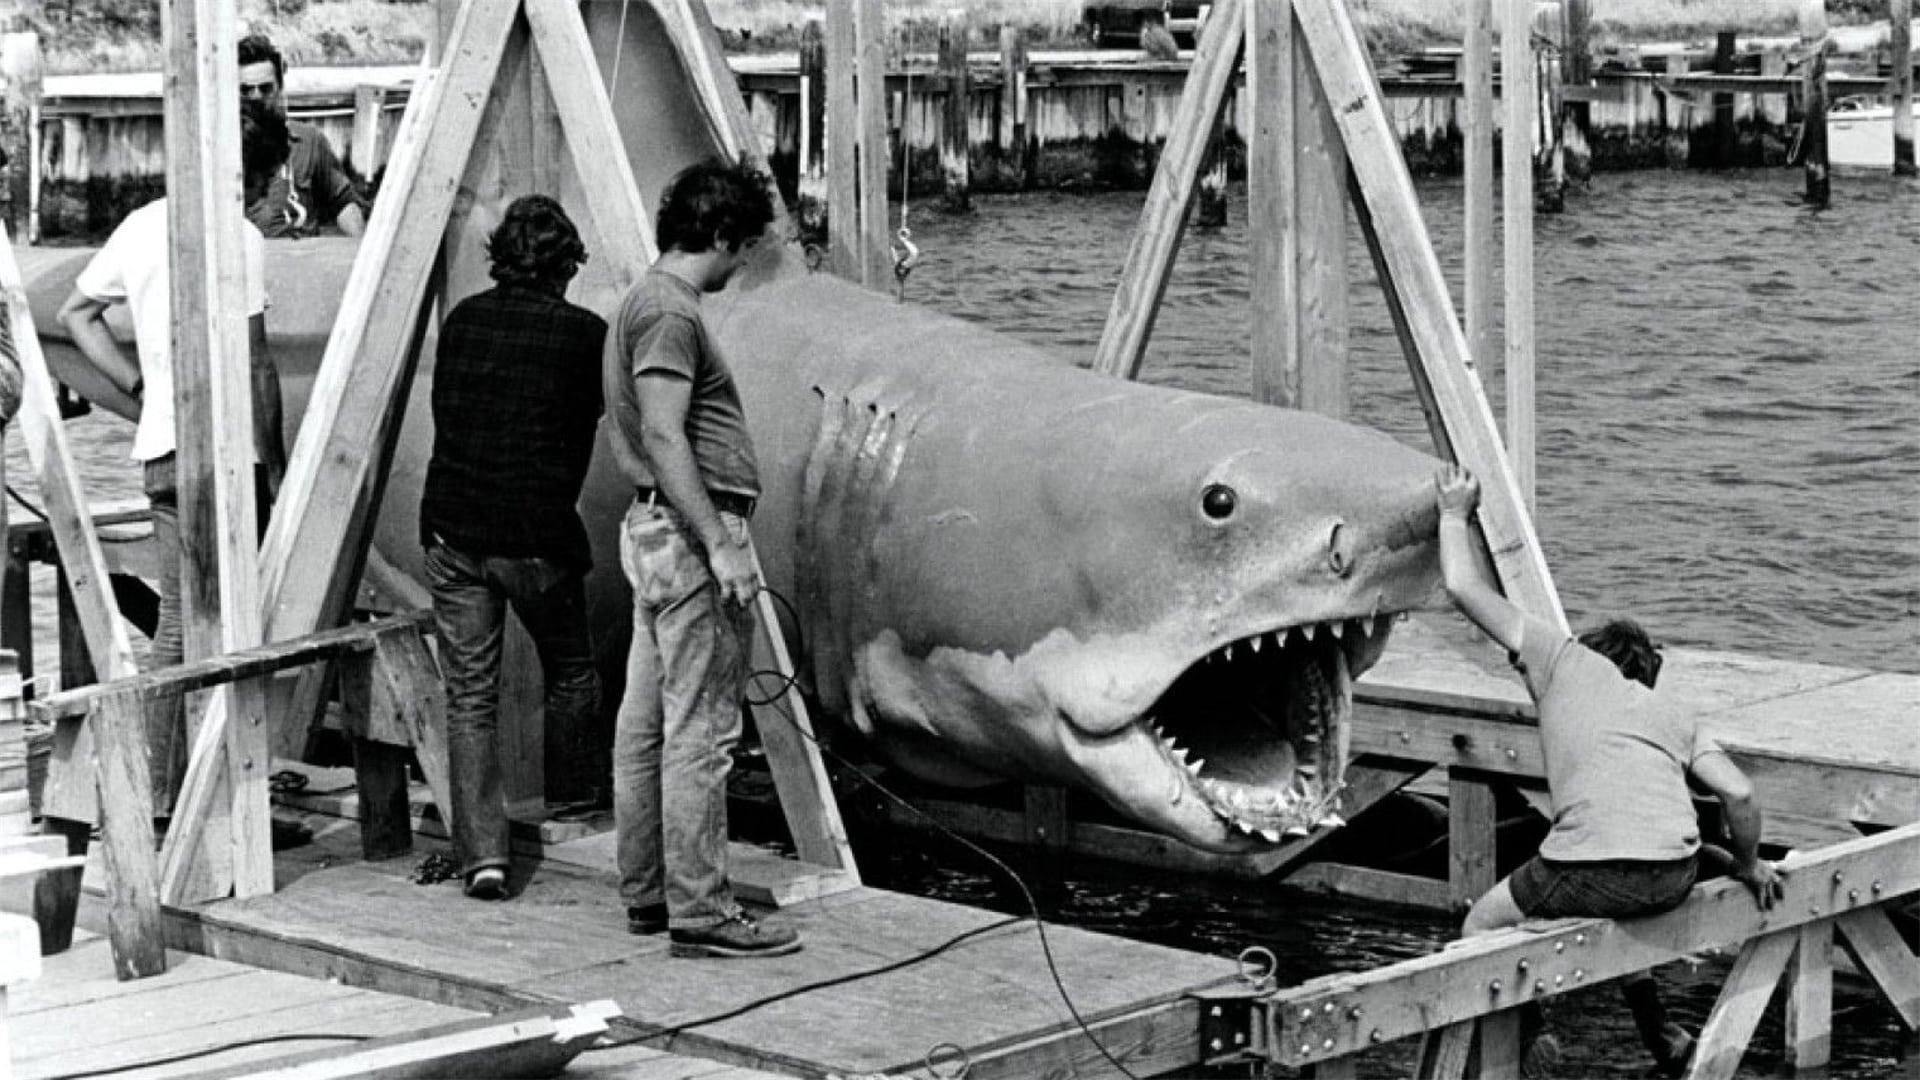 The Shark Is Still Working: The Impact & Legacy of 'Jaws' backdrop